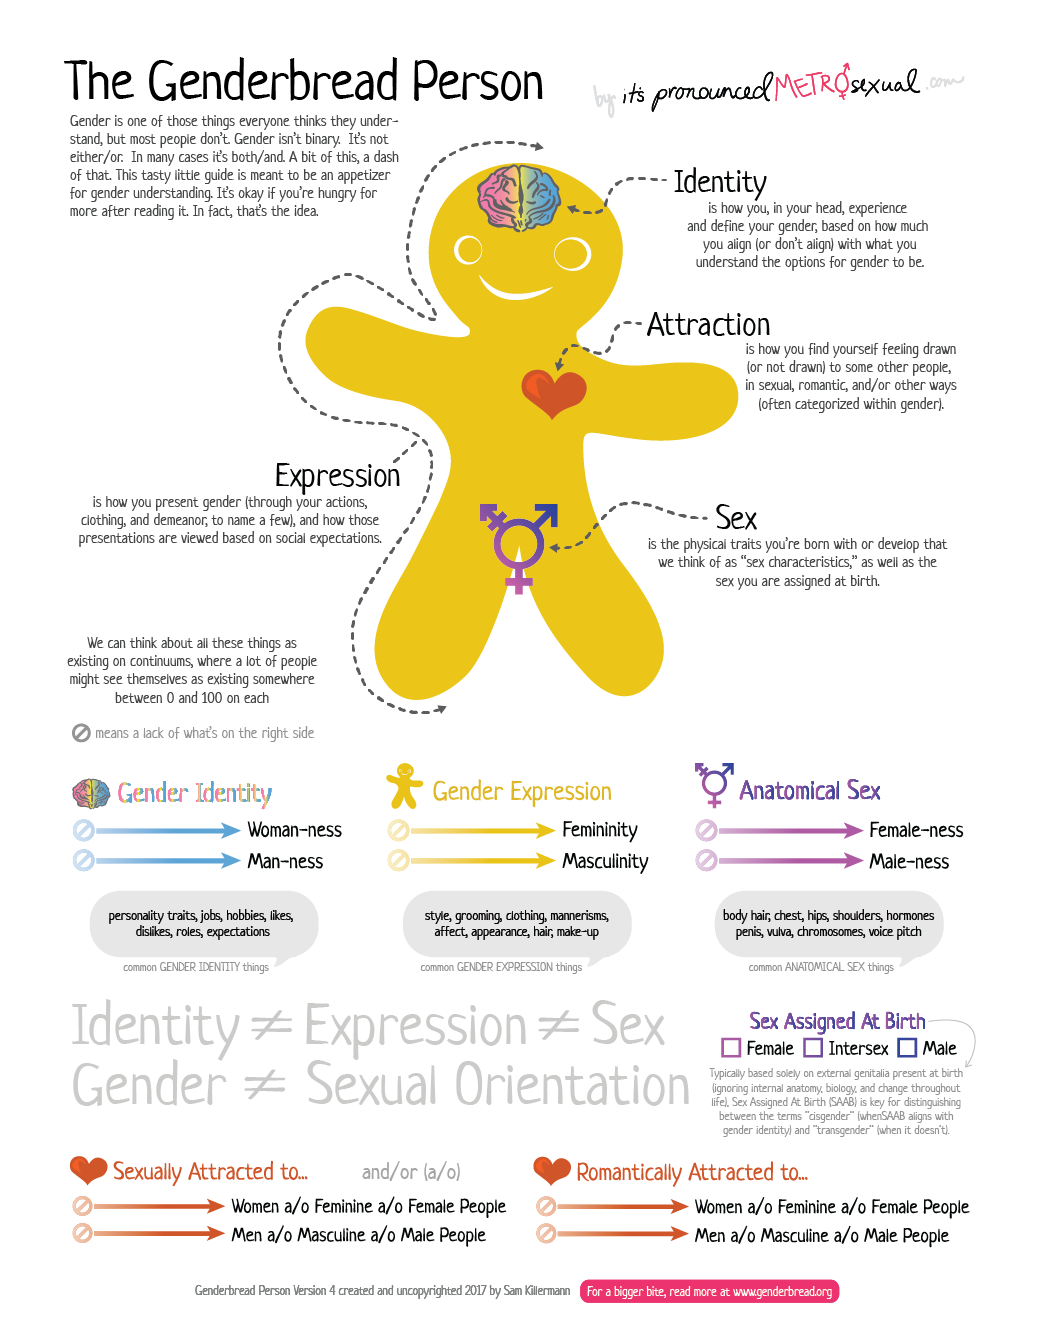 Genderbread Person showing different dimensions of gender and sexual diversities